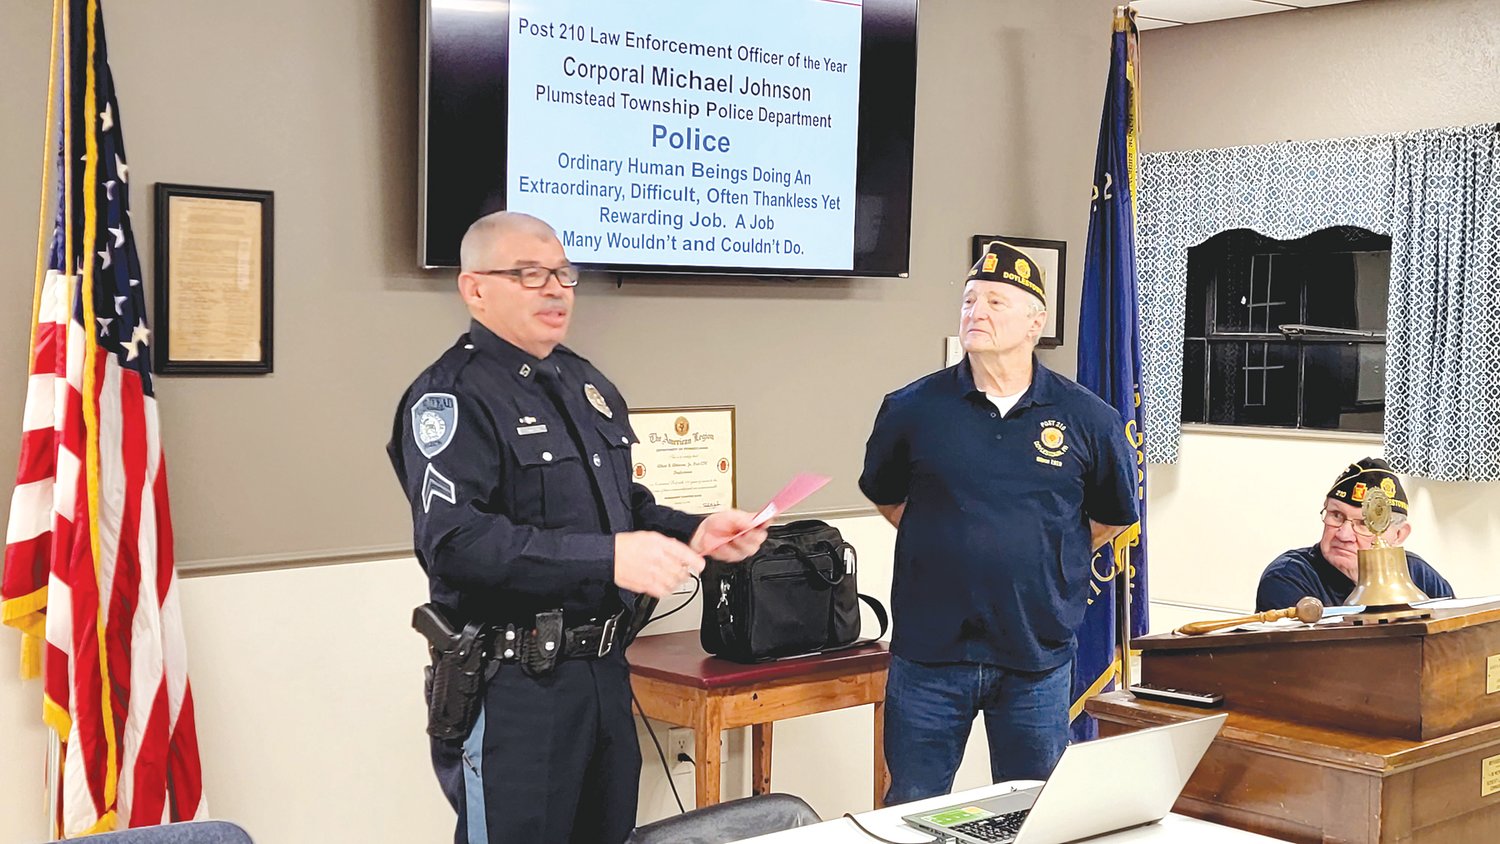 Cpl. Michael Johnson of the Plumstead Township Police Department, left, is presented with the award for Law Enforcement Officer of the Year by Pete Scott, commander of the Albert R. Atkinson Jr. Post 210 American Legion in Doylestown. Looking on is Ed Lisowski.